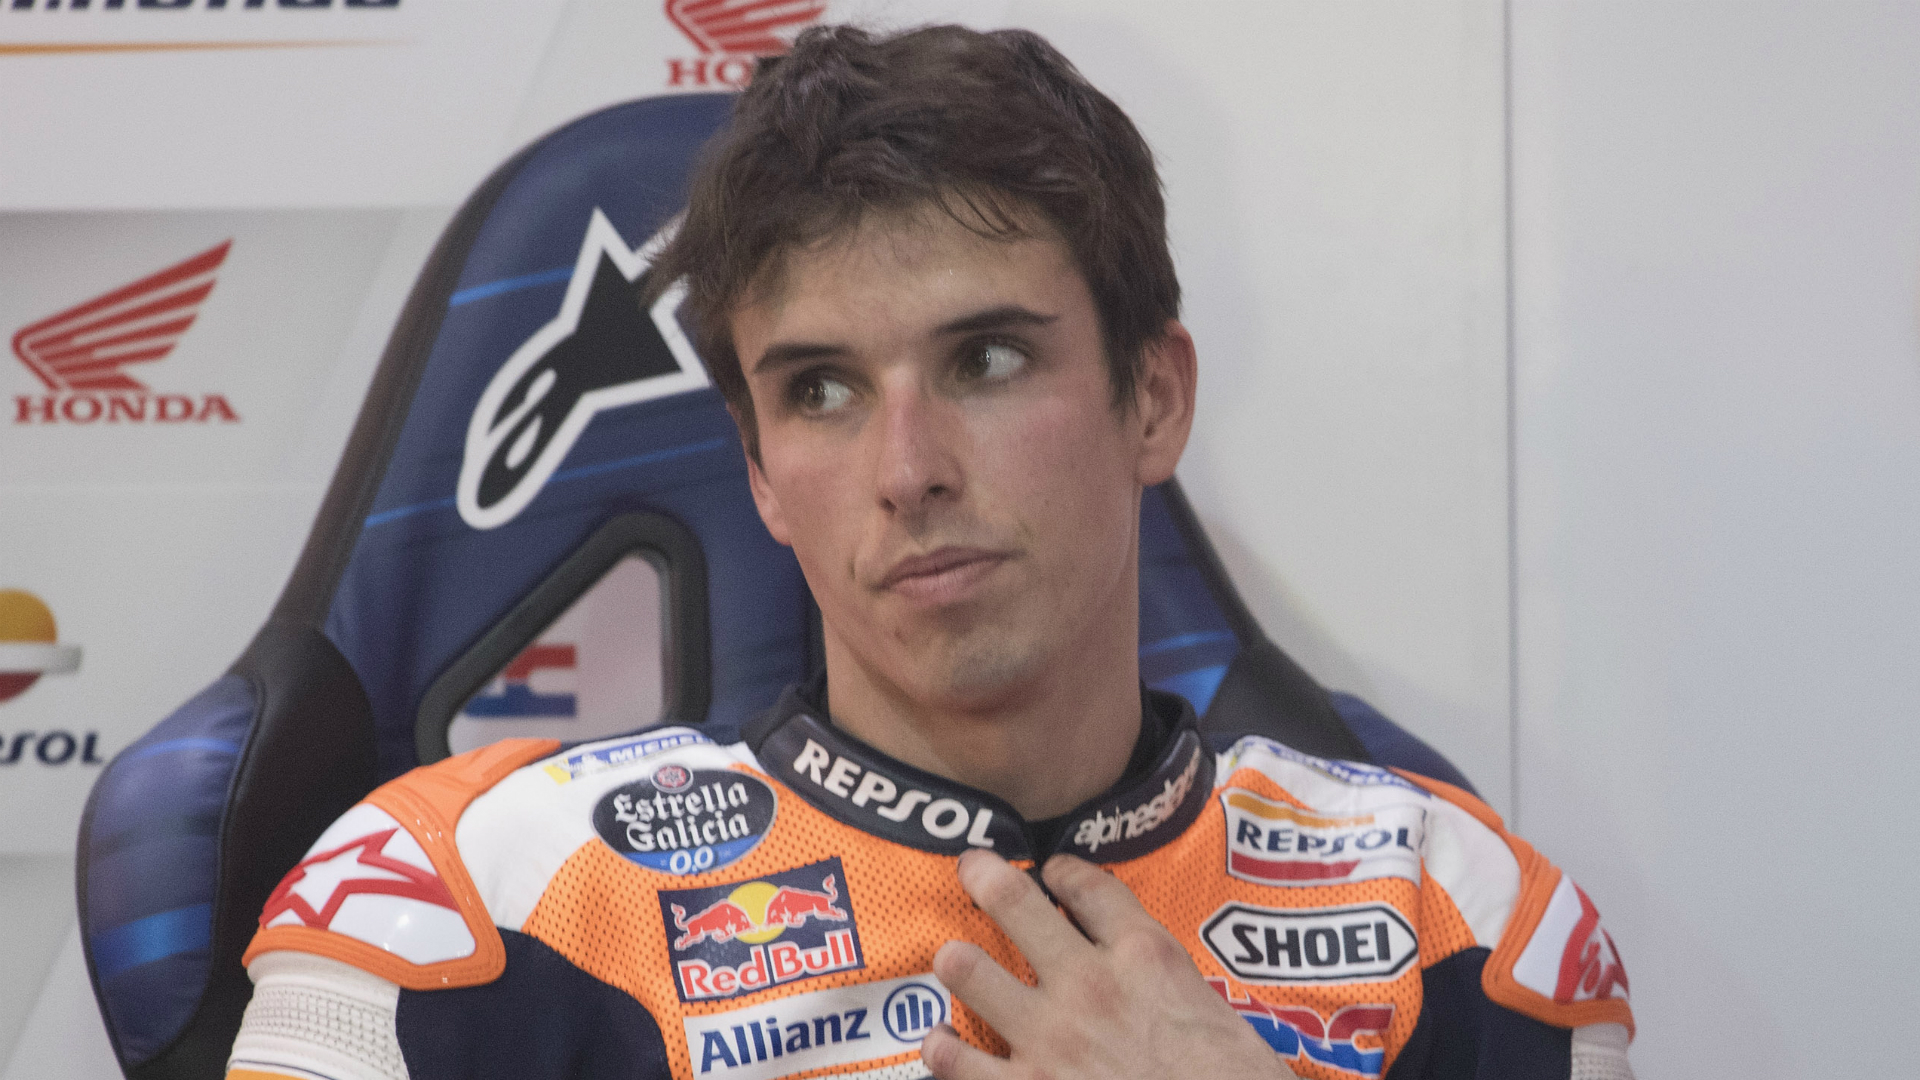 Repsol Honda handed Alex Marquez a one-year deal for the 2020 season, and brother Marc will have no say on an extension.